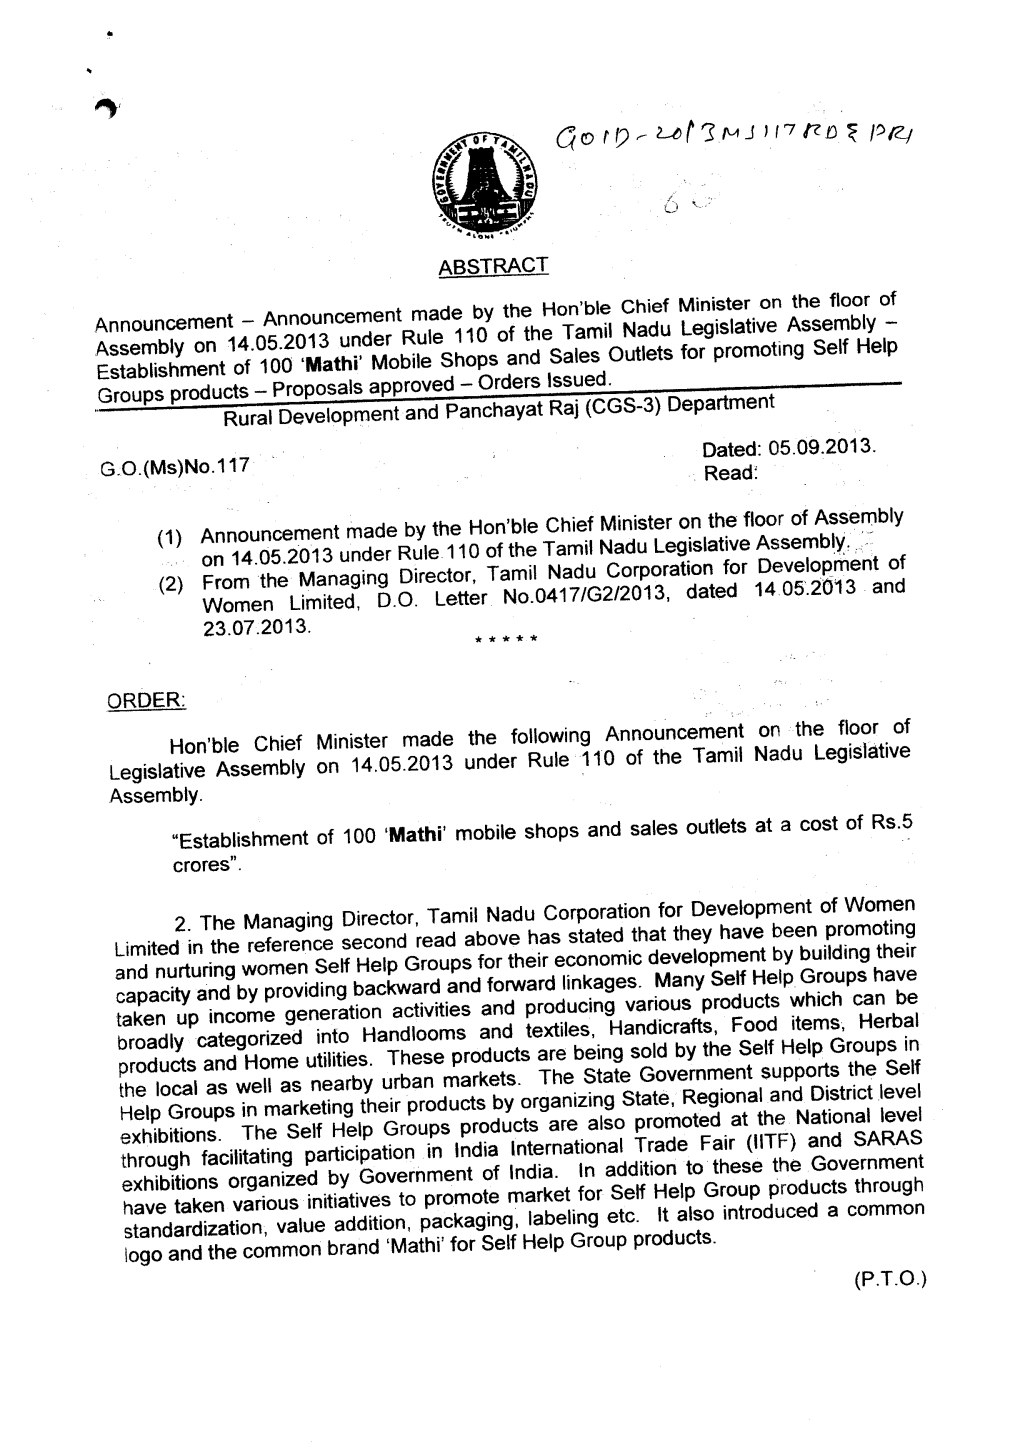 ABSTRACT Announcement Announcement Made by the Hon'ble Chief Minister on the Floor of Assembly on 14.05.2013 Under Rule 110 Of